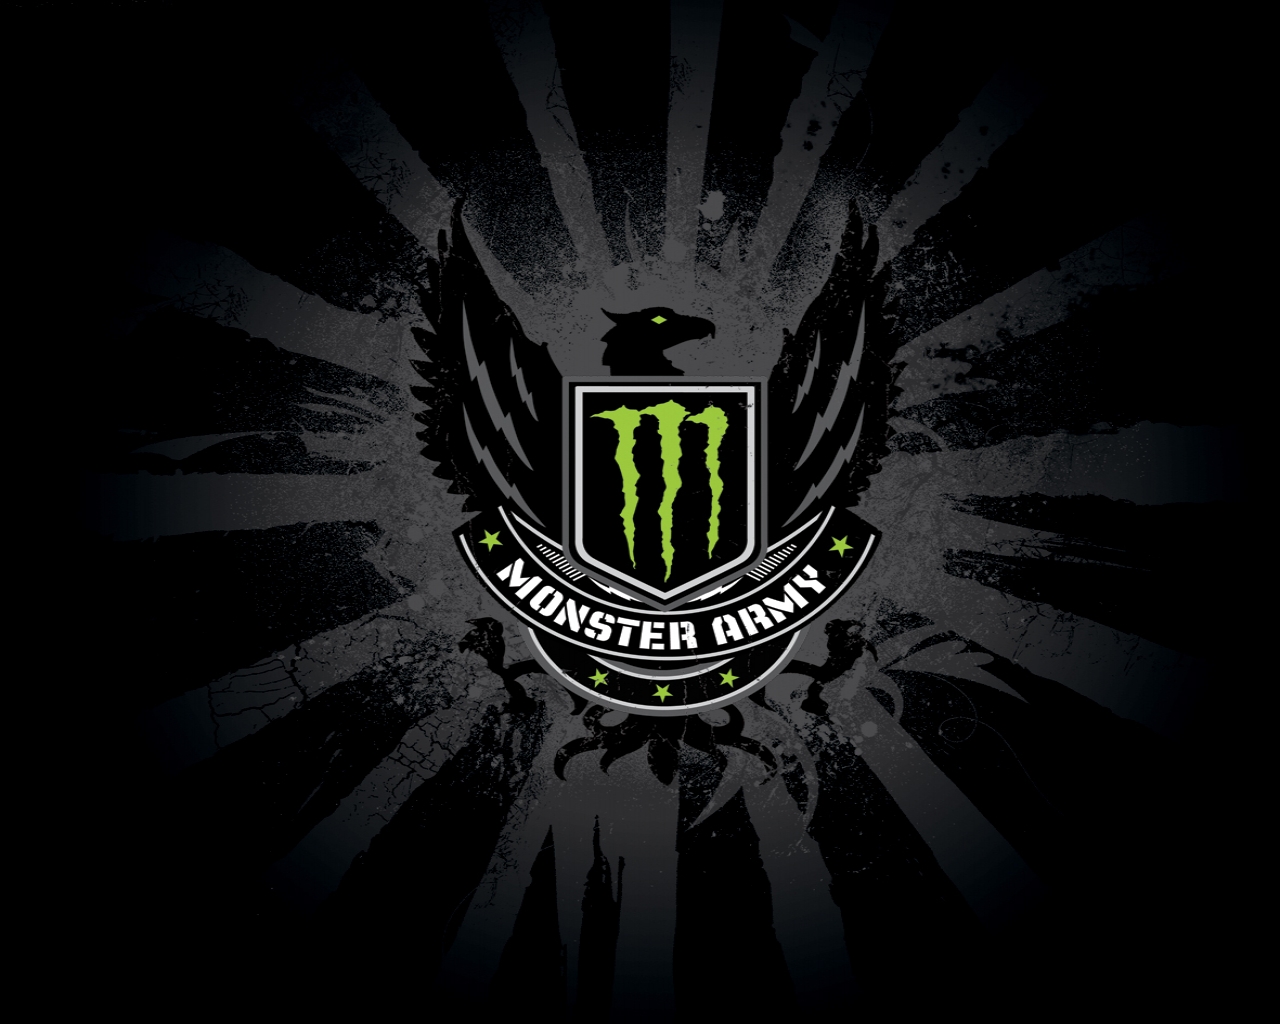 Monster Energy on Twitter hey show us your Monster tattoo you will be  compensated for your dedication  AllAccess httpstcoGvER9KYnTJ  httpstcofjzfMaRPZs  Twitter